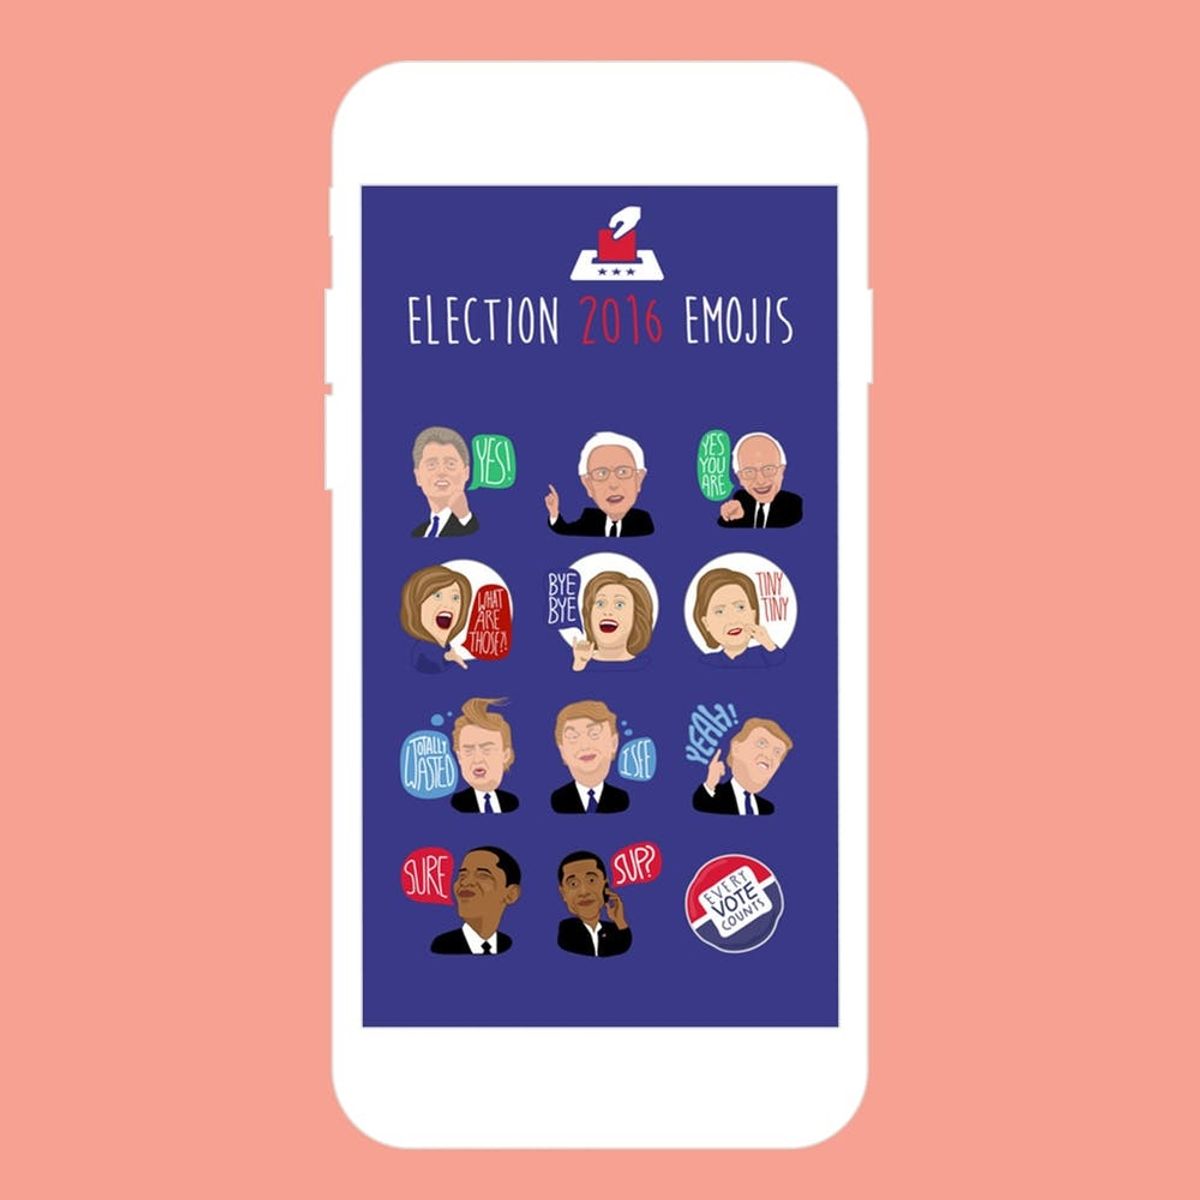 10 Apps to Download Before Election Day